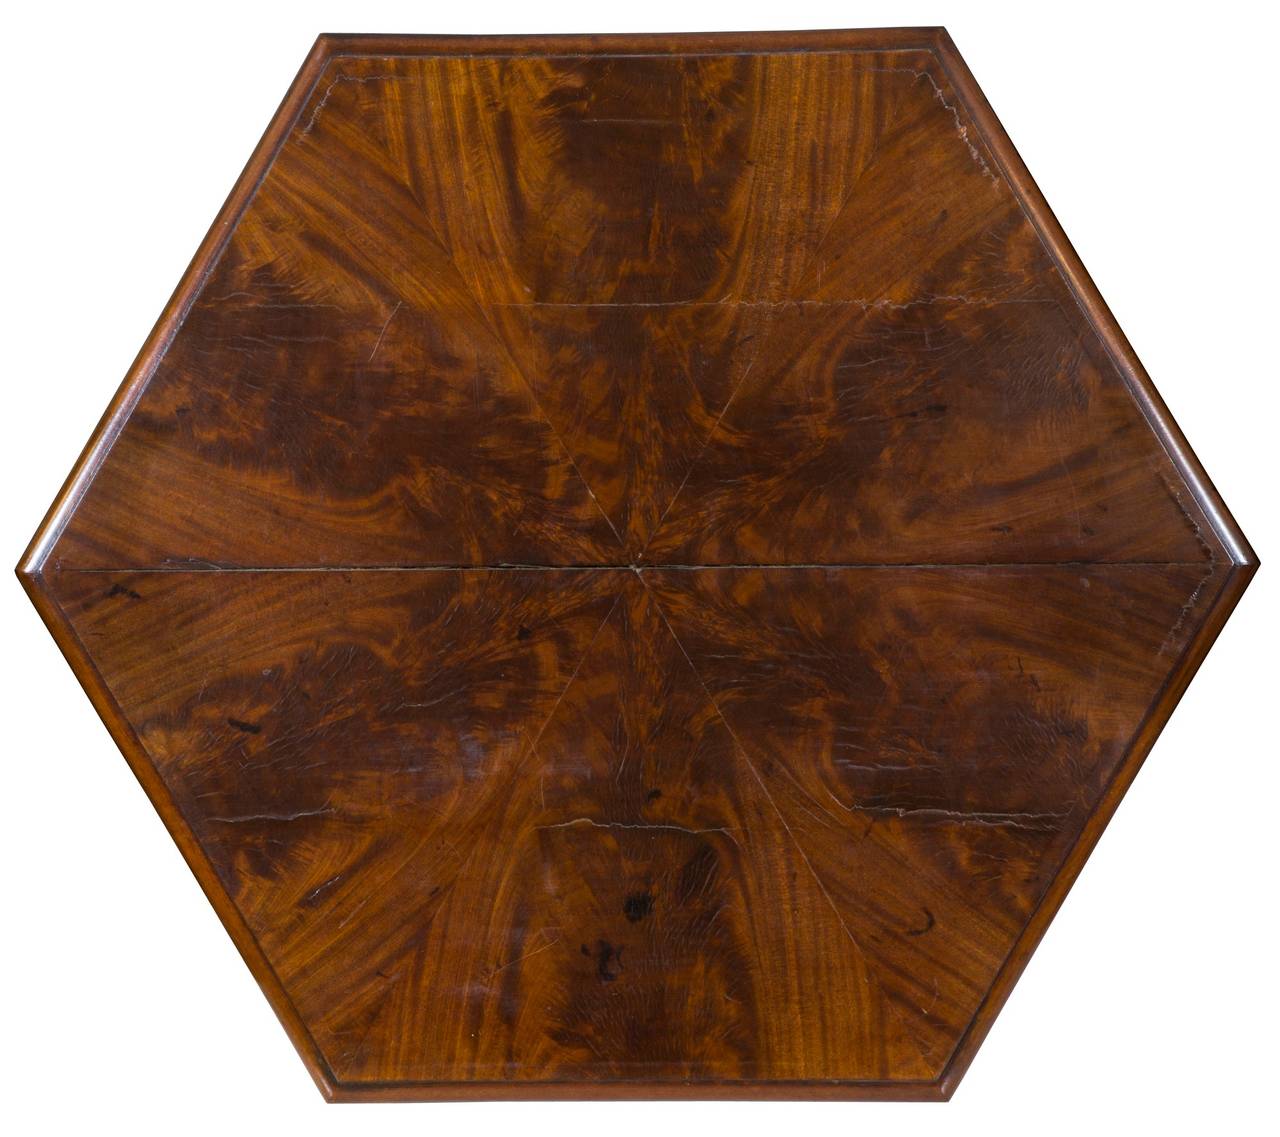 This Classic hexagonal center table uses the six-sided form to its advantage with coordinated matching figured mahogany achieving a dramatic effect (see image). Sometimes, these tables have marble tops, which lean toward a later Victorian concept